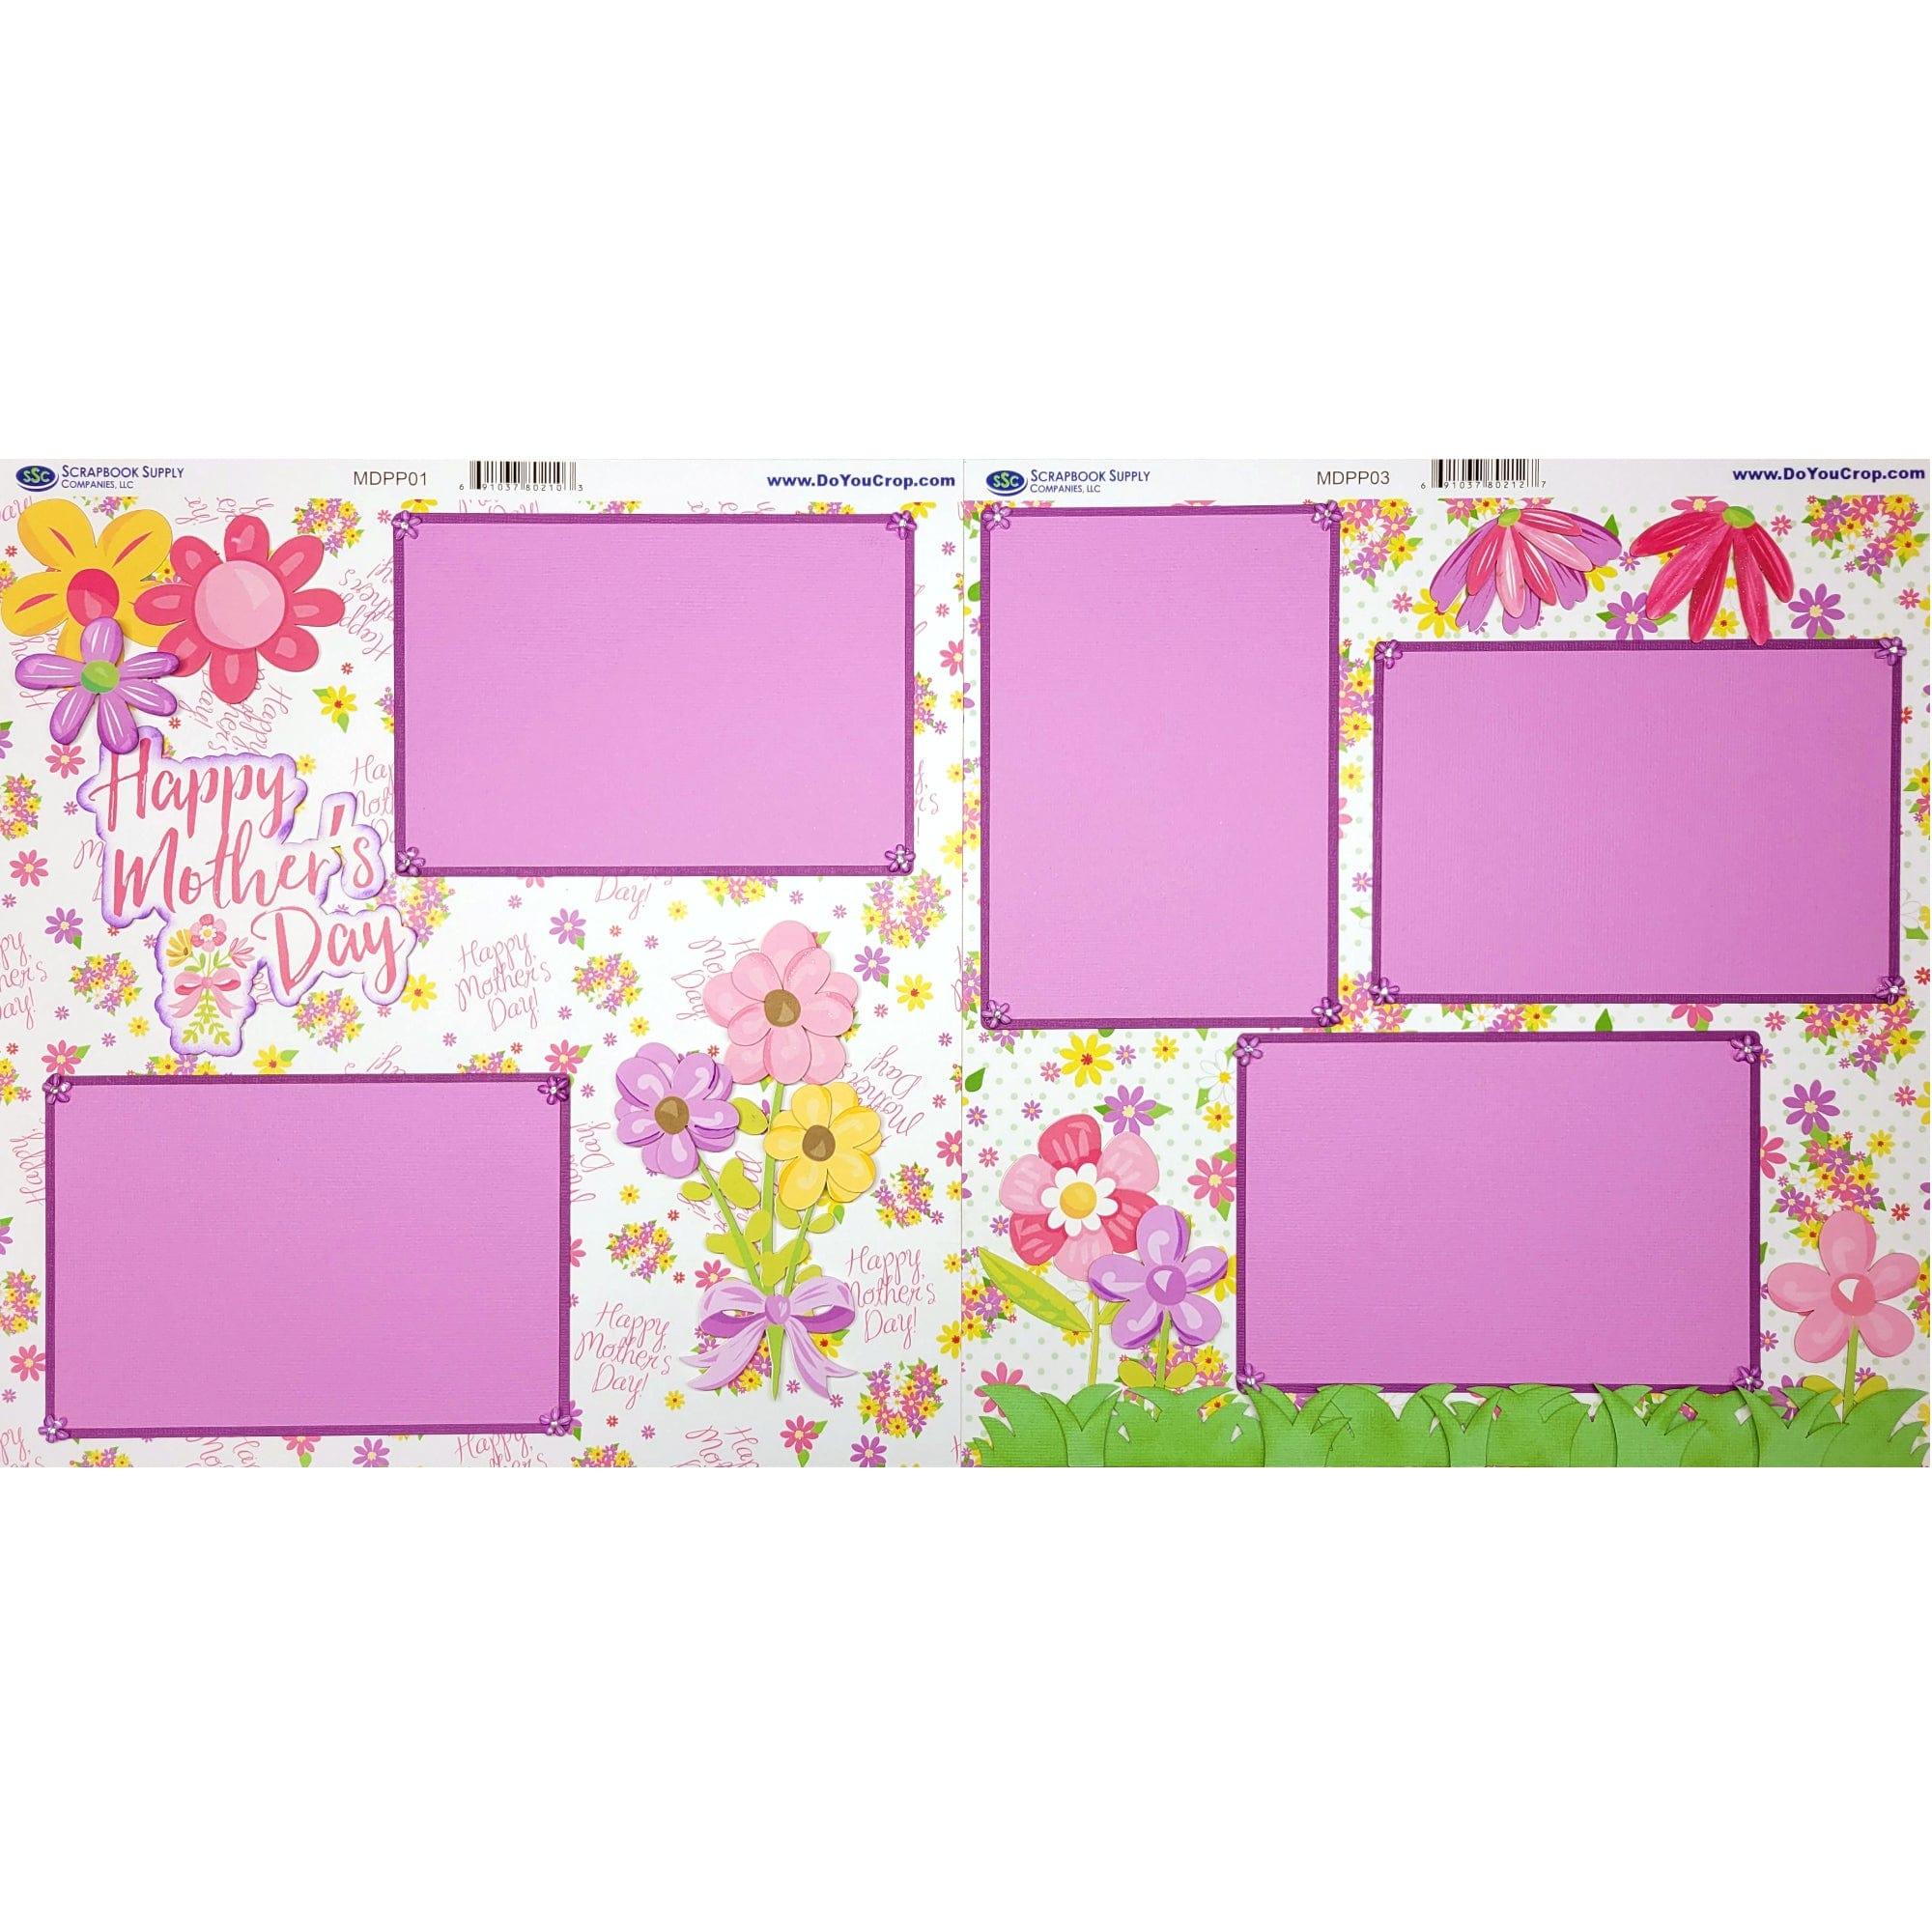 Happy Mother's Day (2) - 12 x 12 Pages, Fully-Assembled & Hand-Crafted 3D Scrapbook Premade by SSC Designs